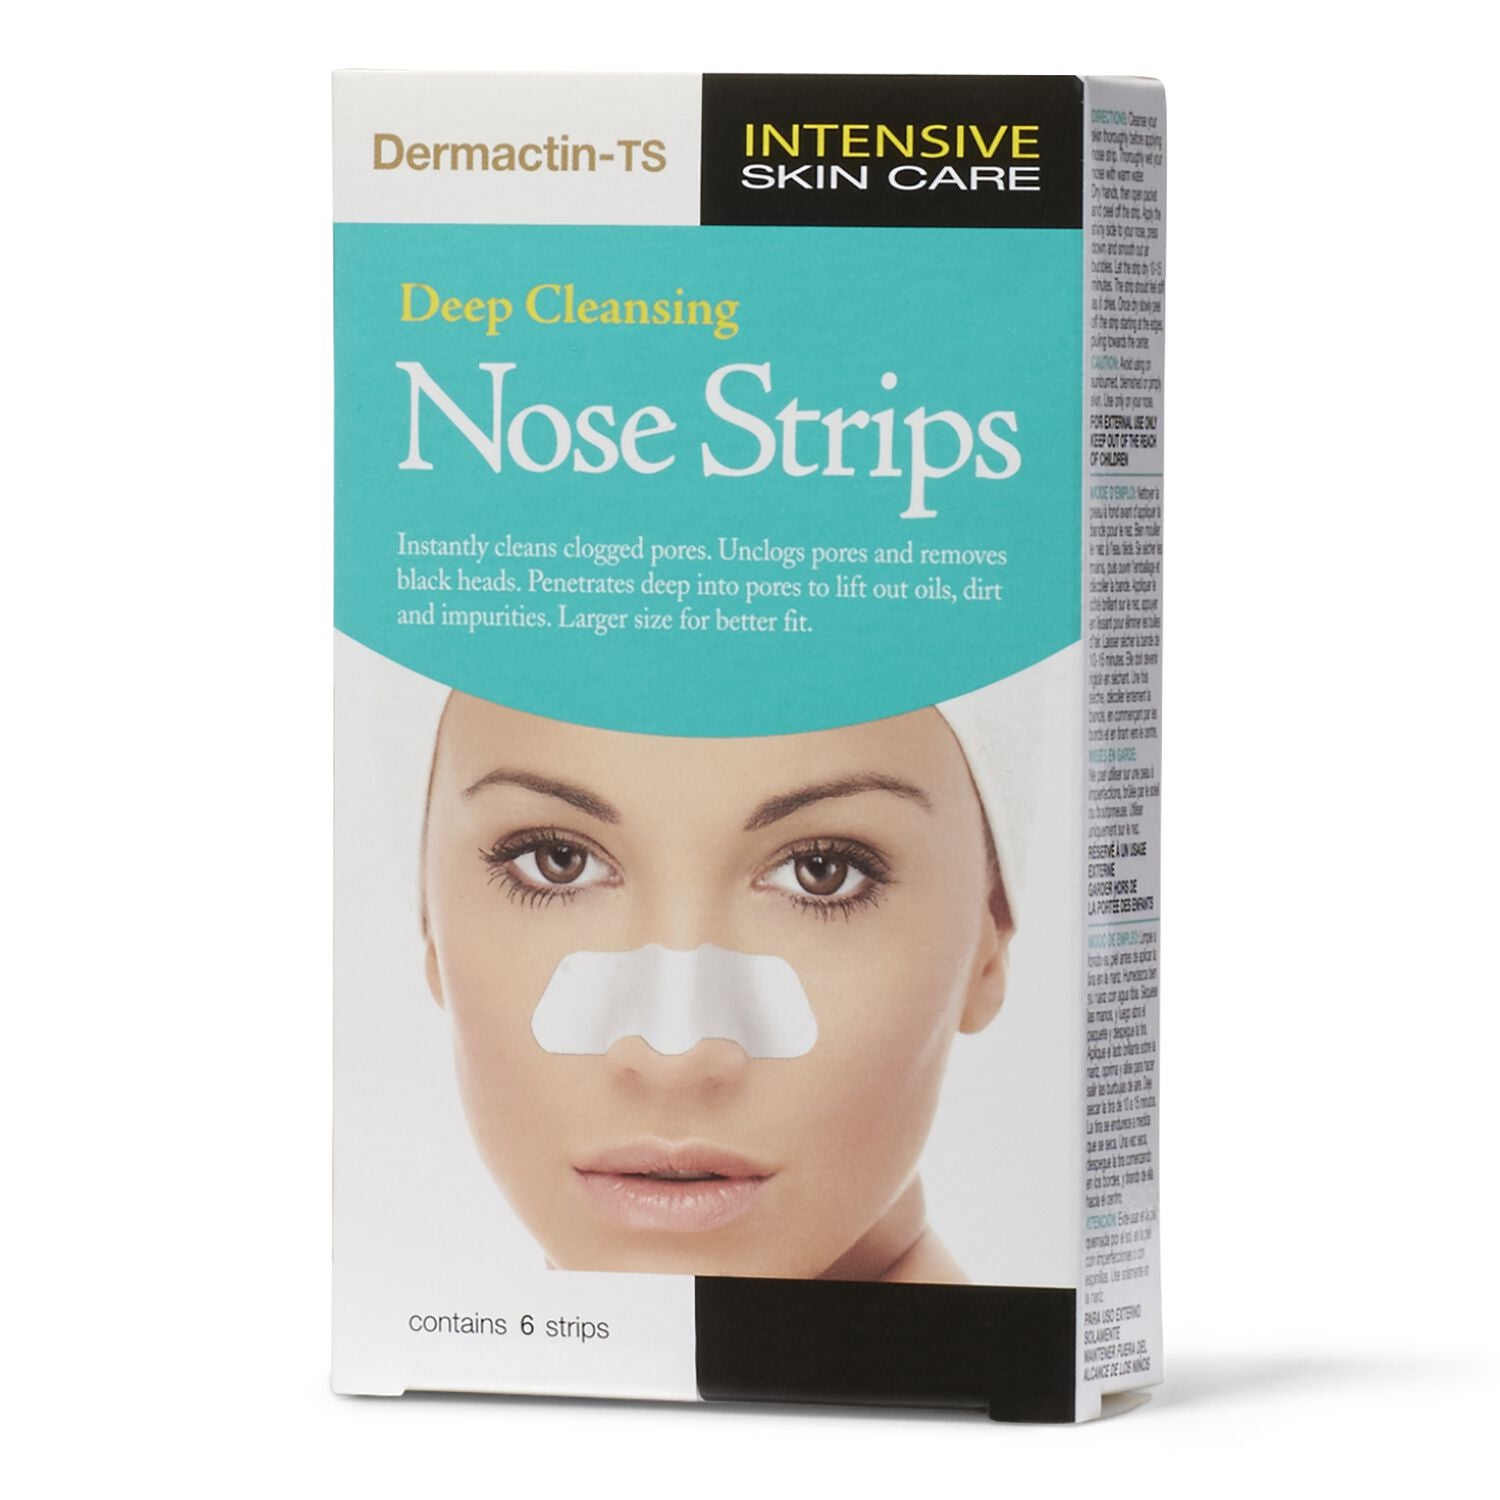 Dermactin-TS Deep Cleansing Nose Strips